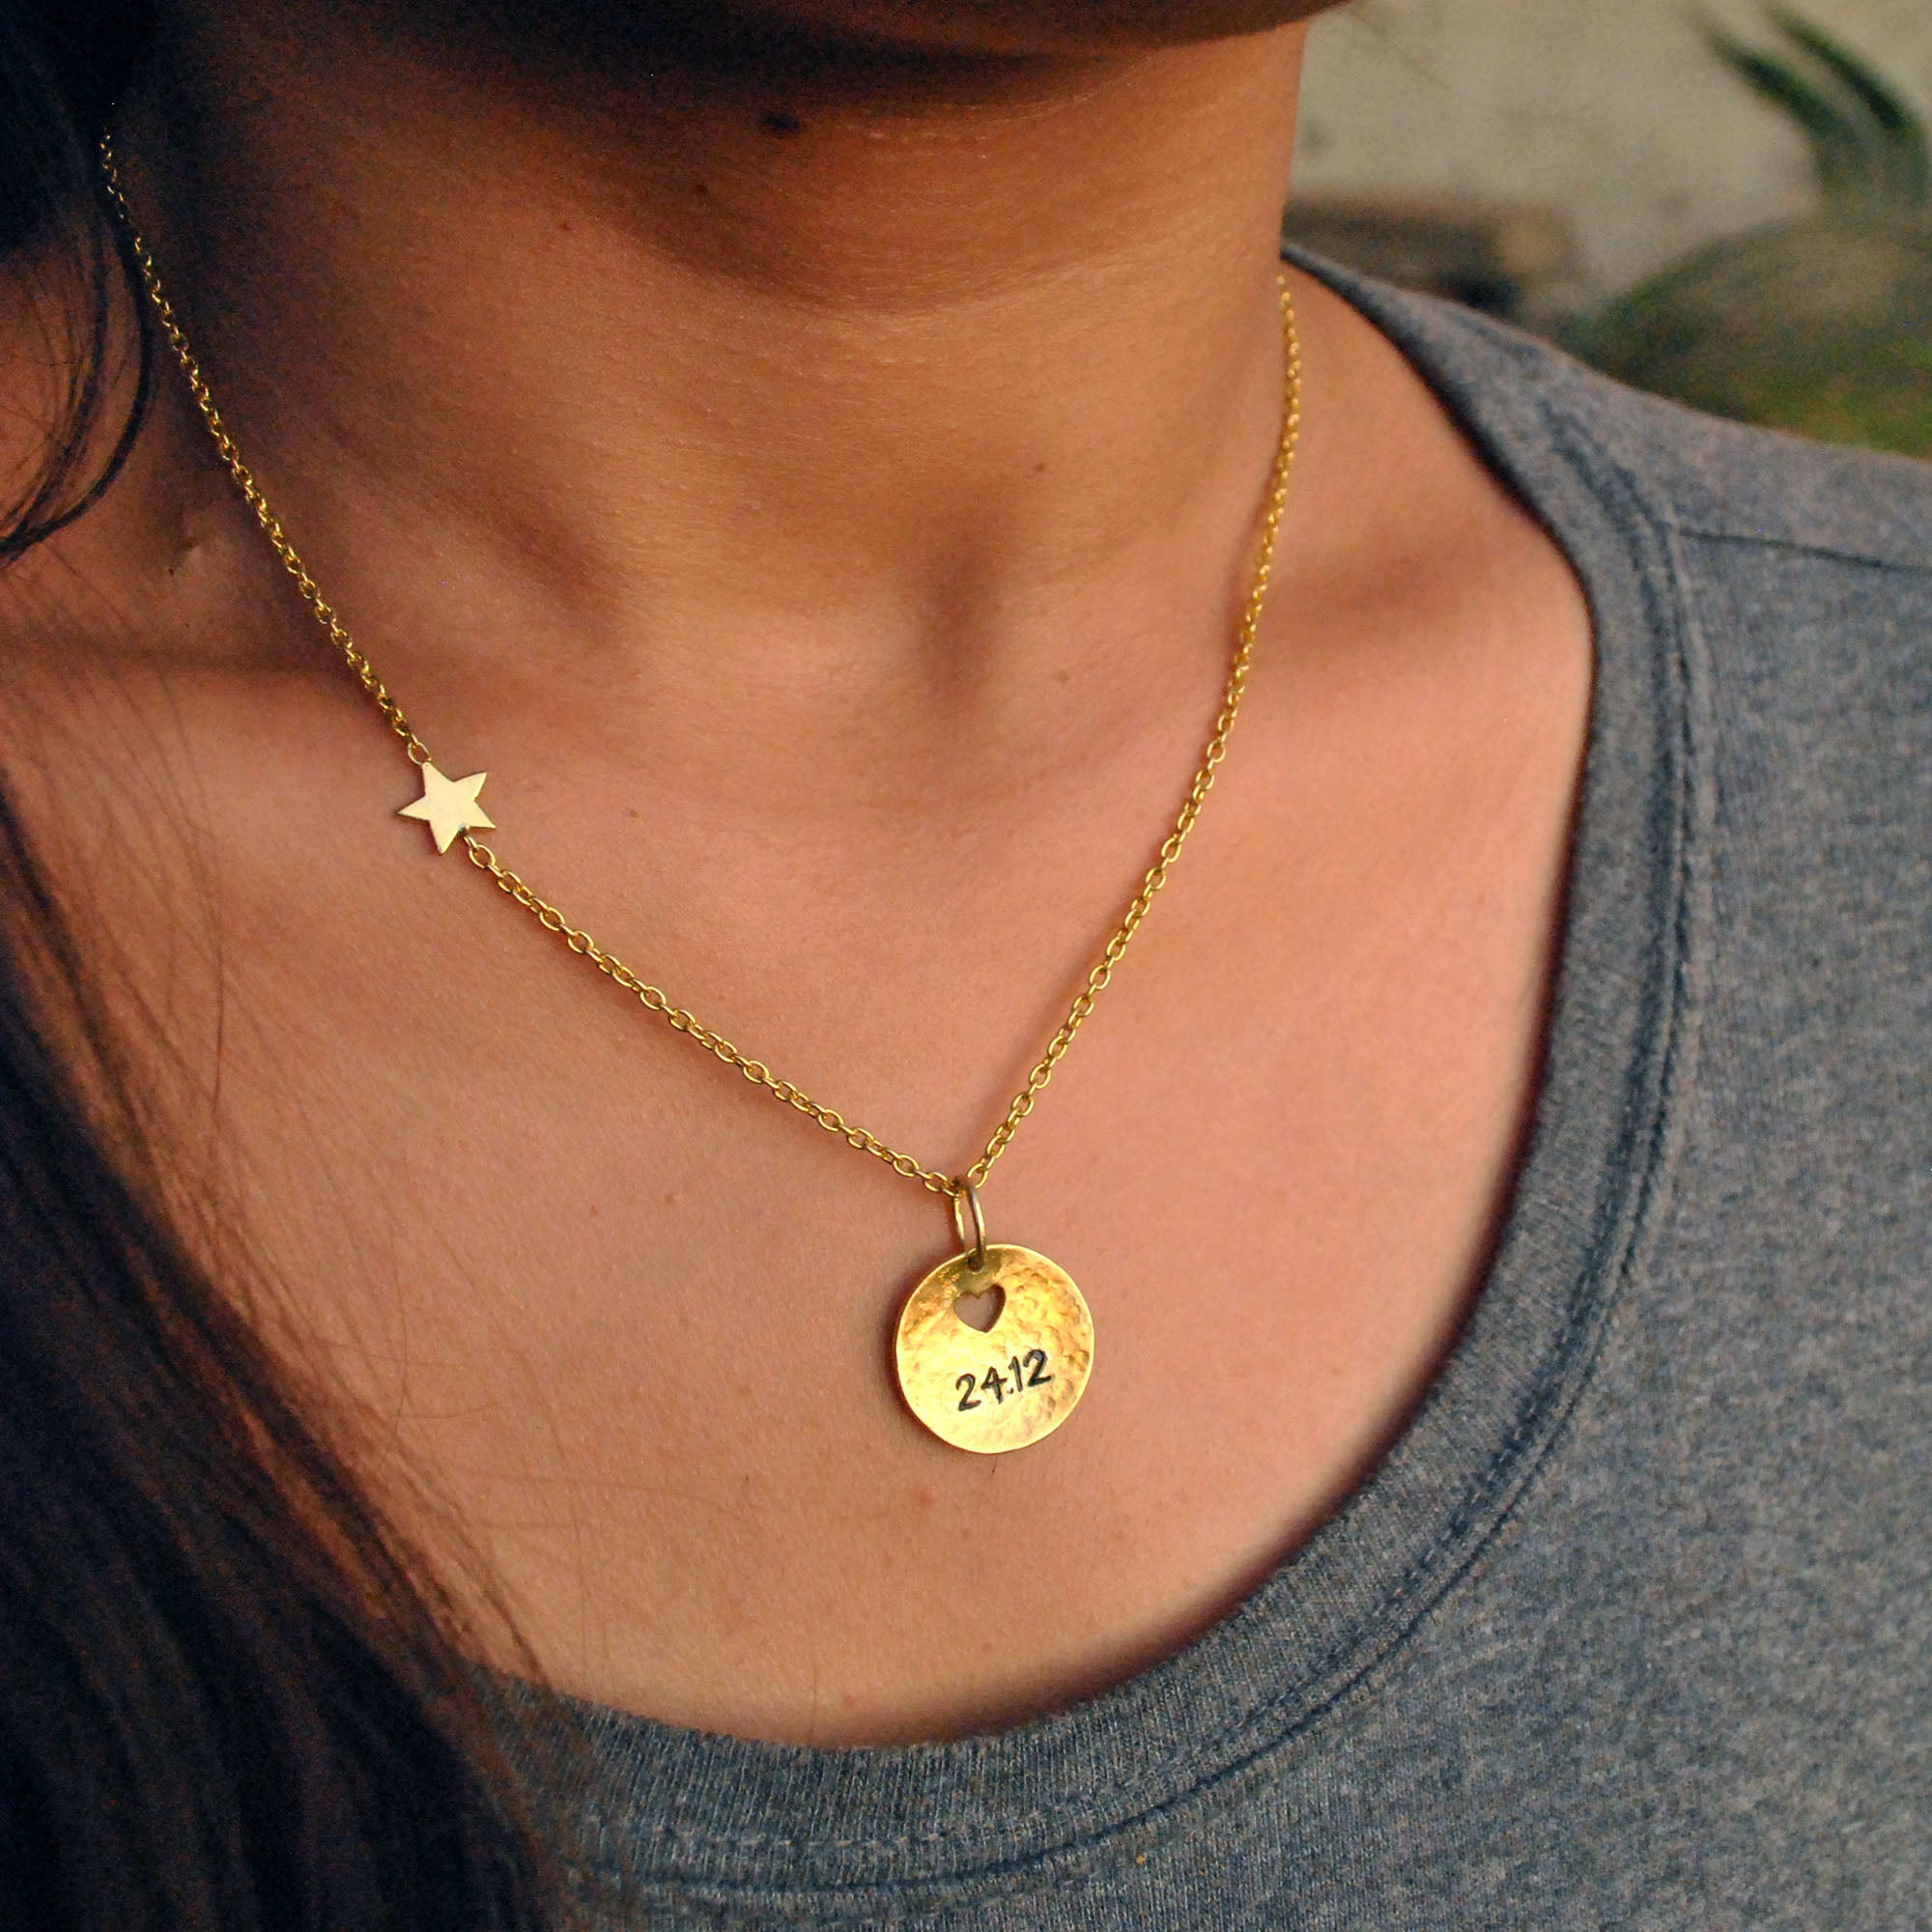 Heart Hammered Plate Personalized Gold Necklace in 14K Gold, Star Customized Necklace (NK013)